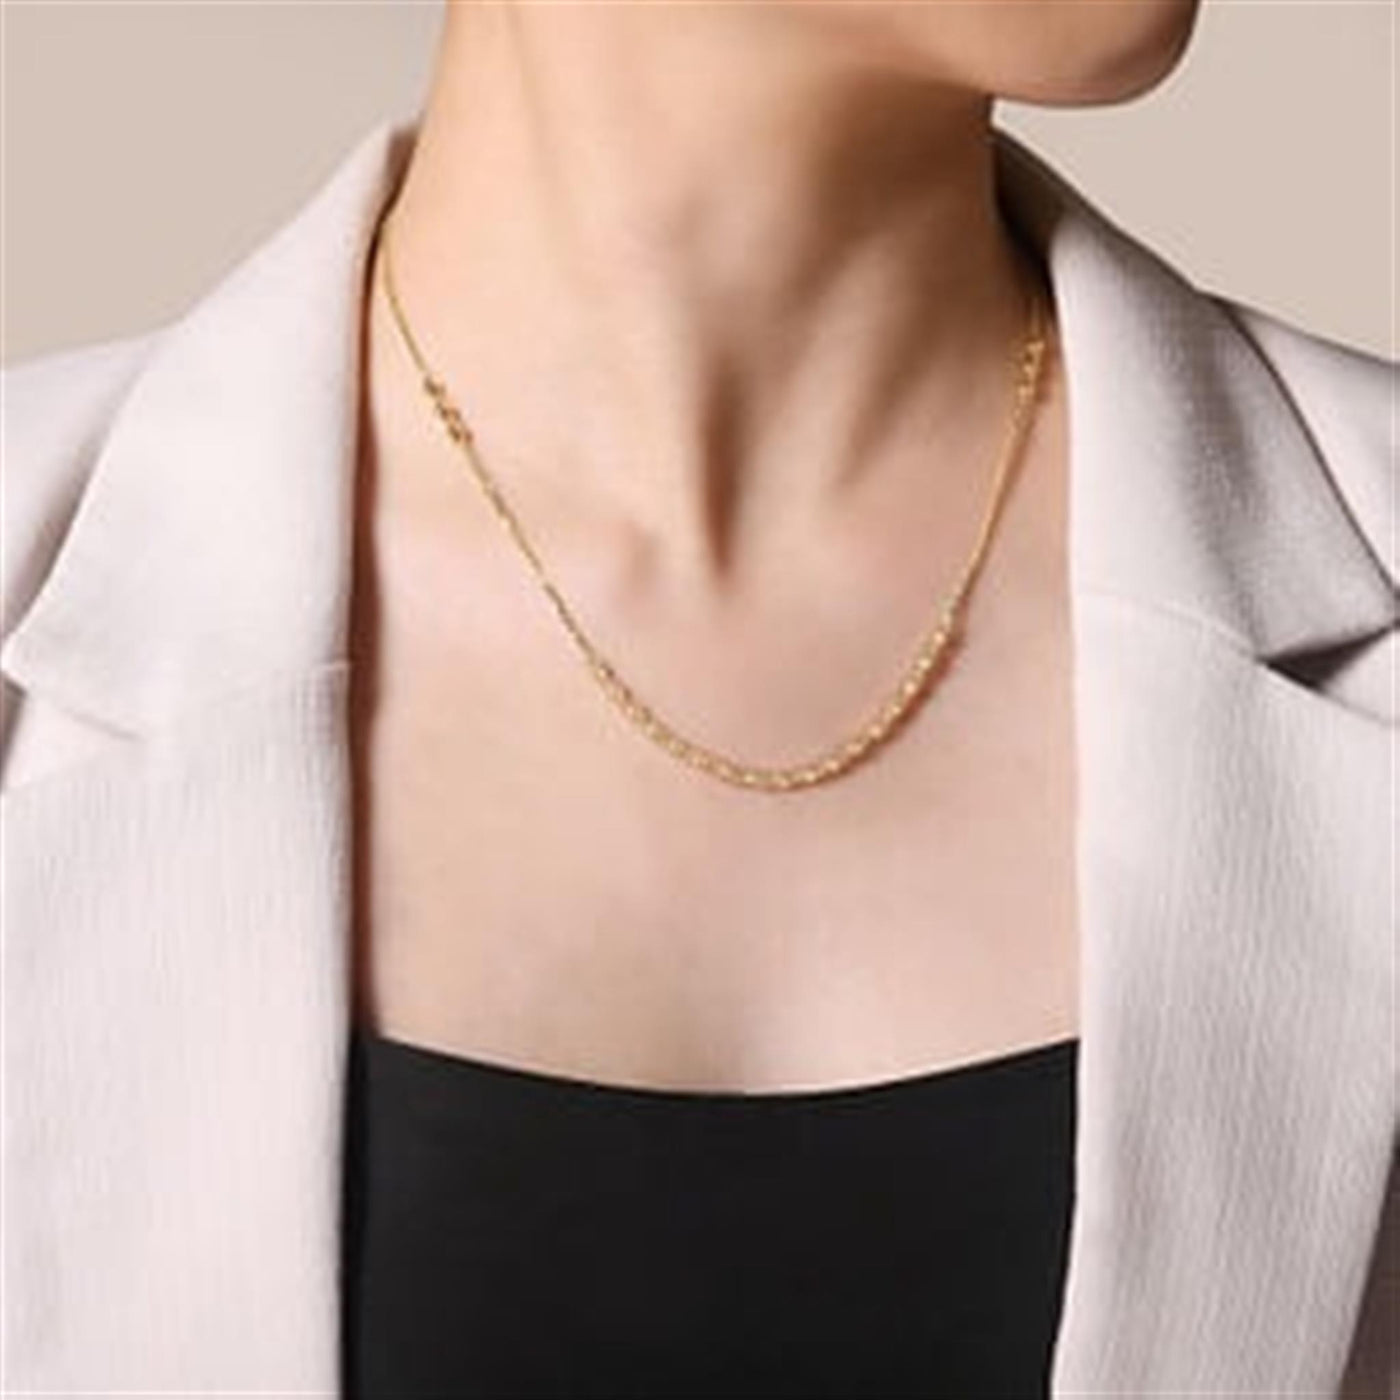 14K Yellow Gold 18" Bead Style Station Necklace